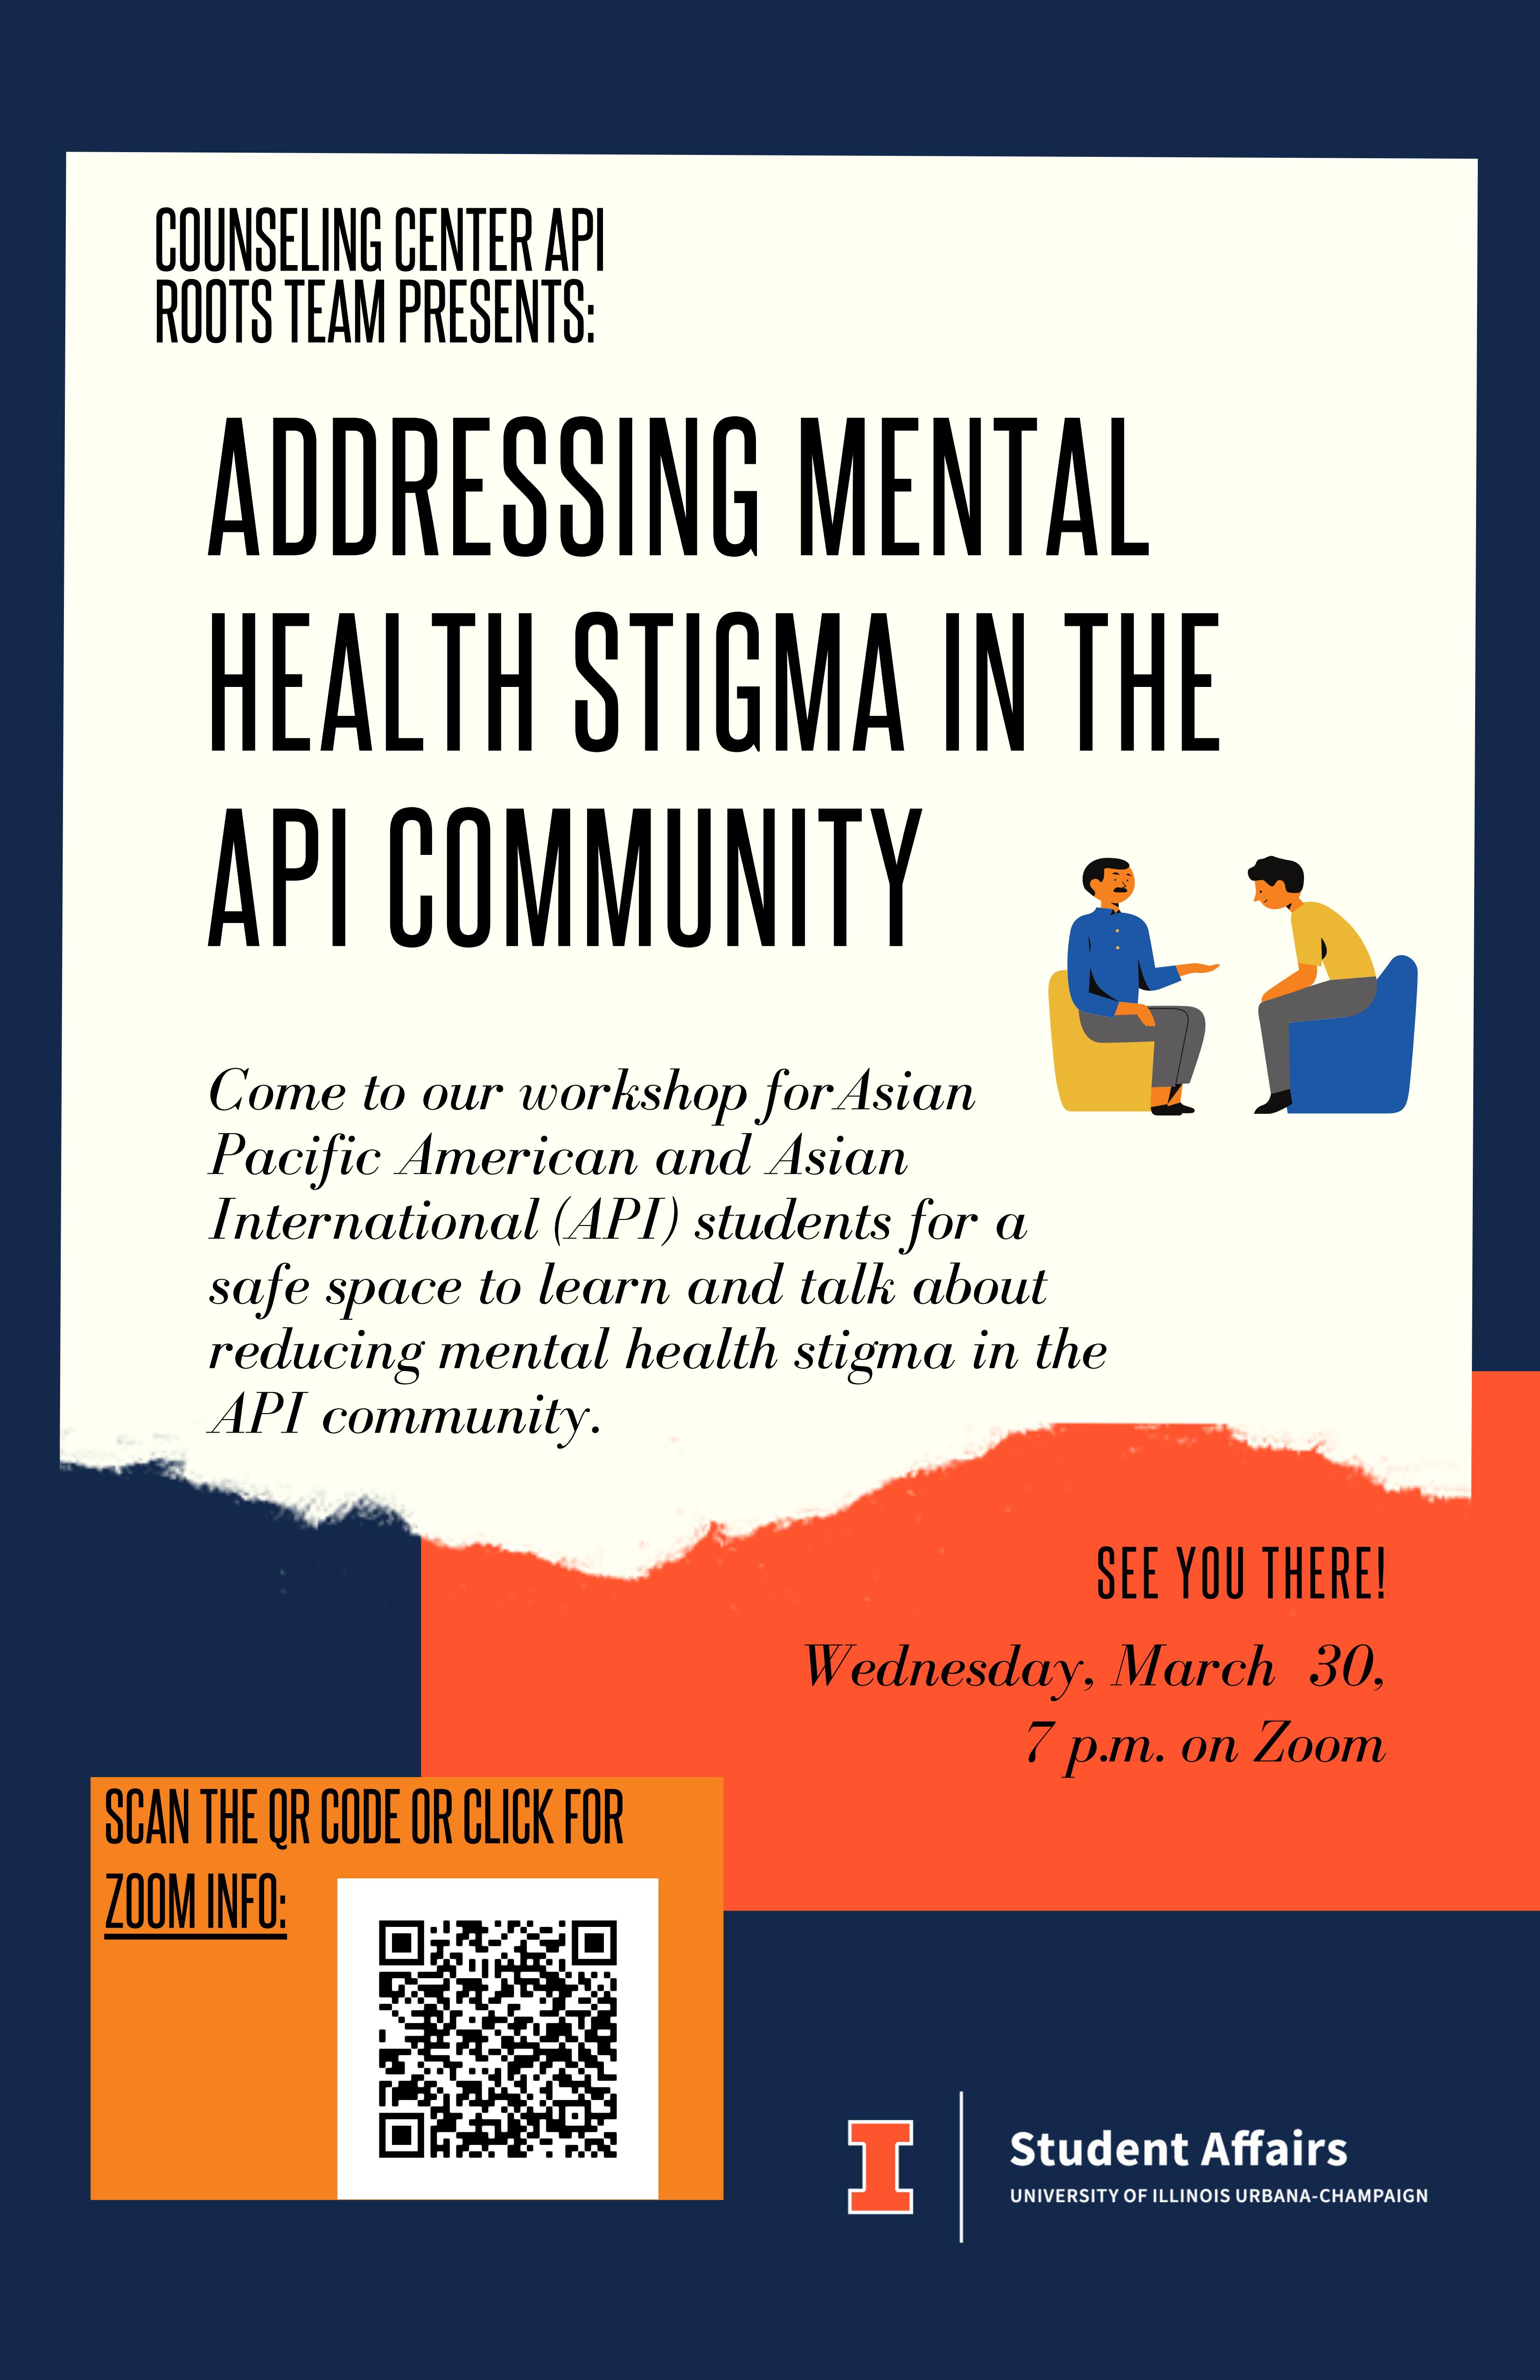 Addressing Mental Health and Stigma in the AAPI Community